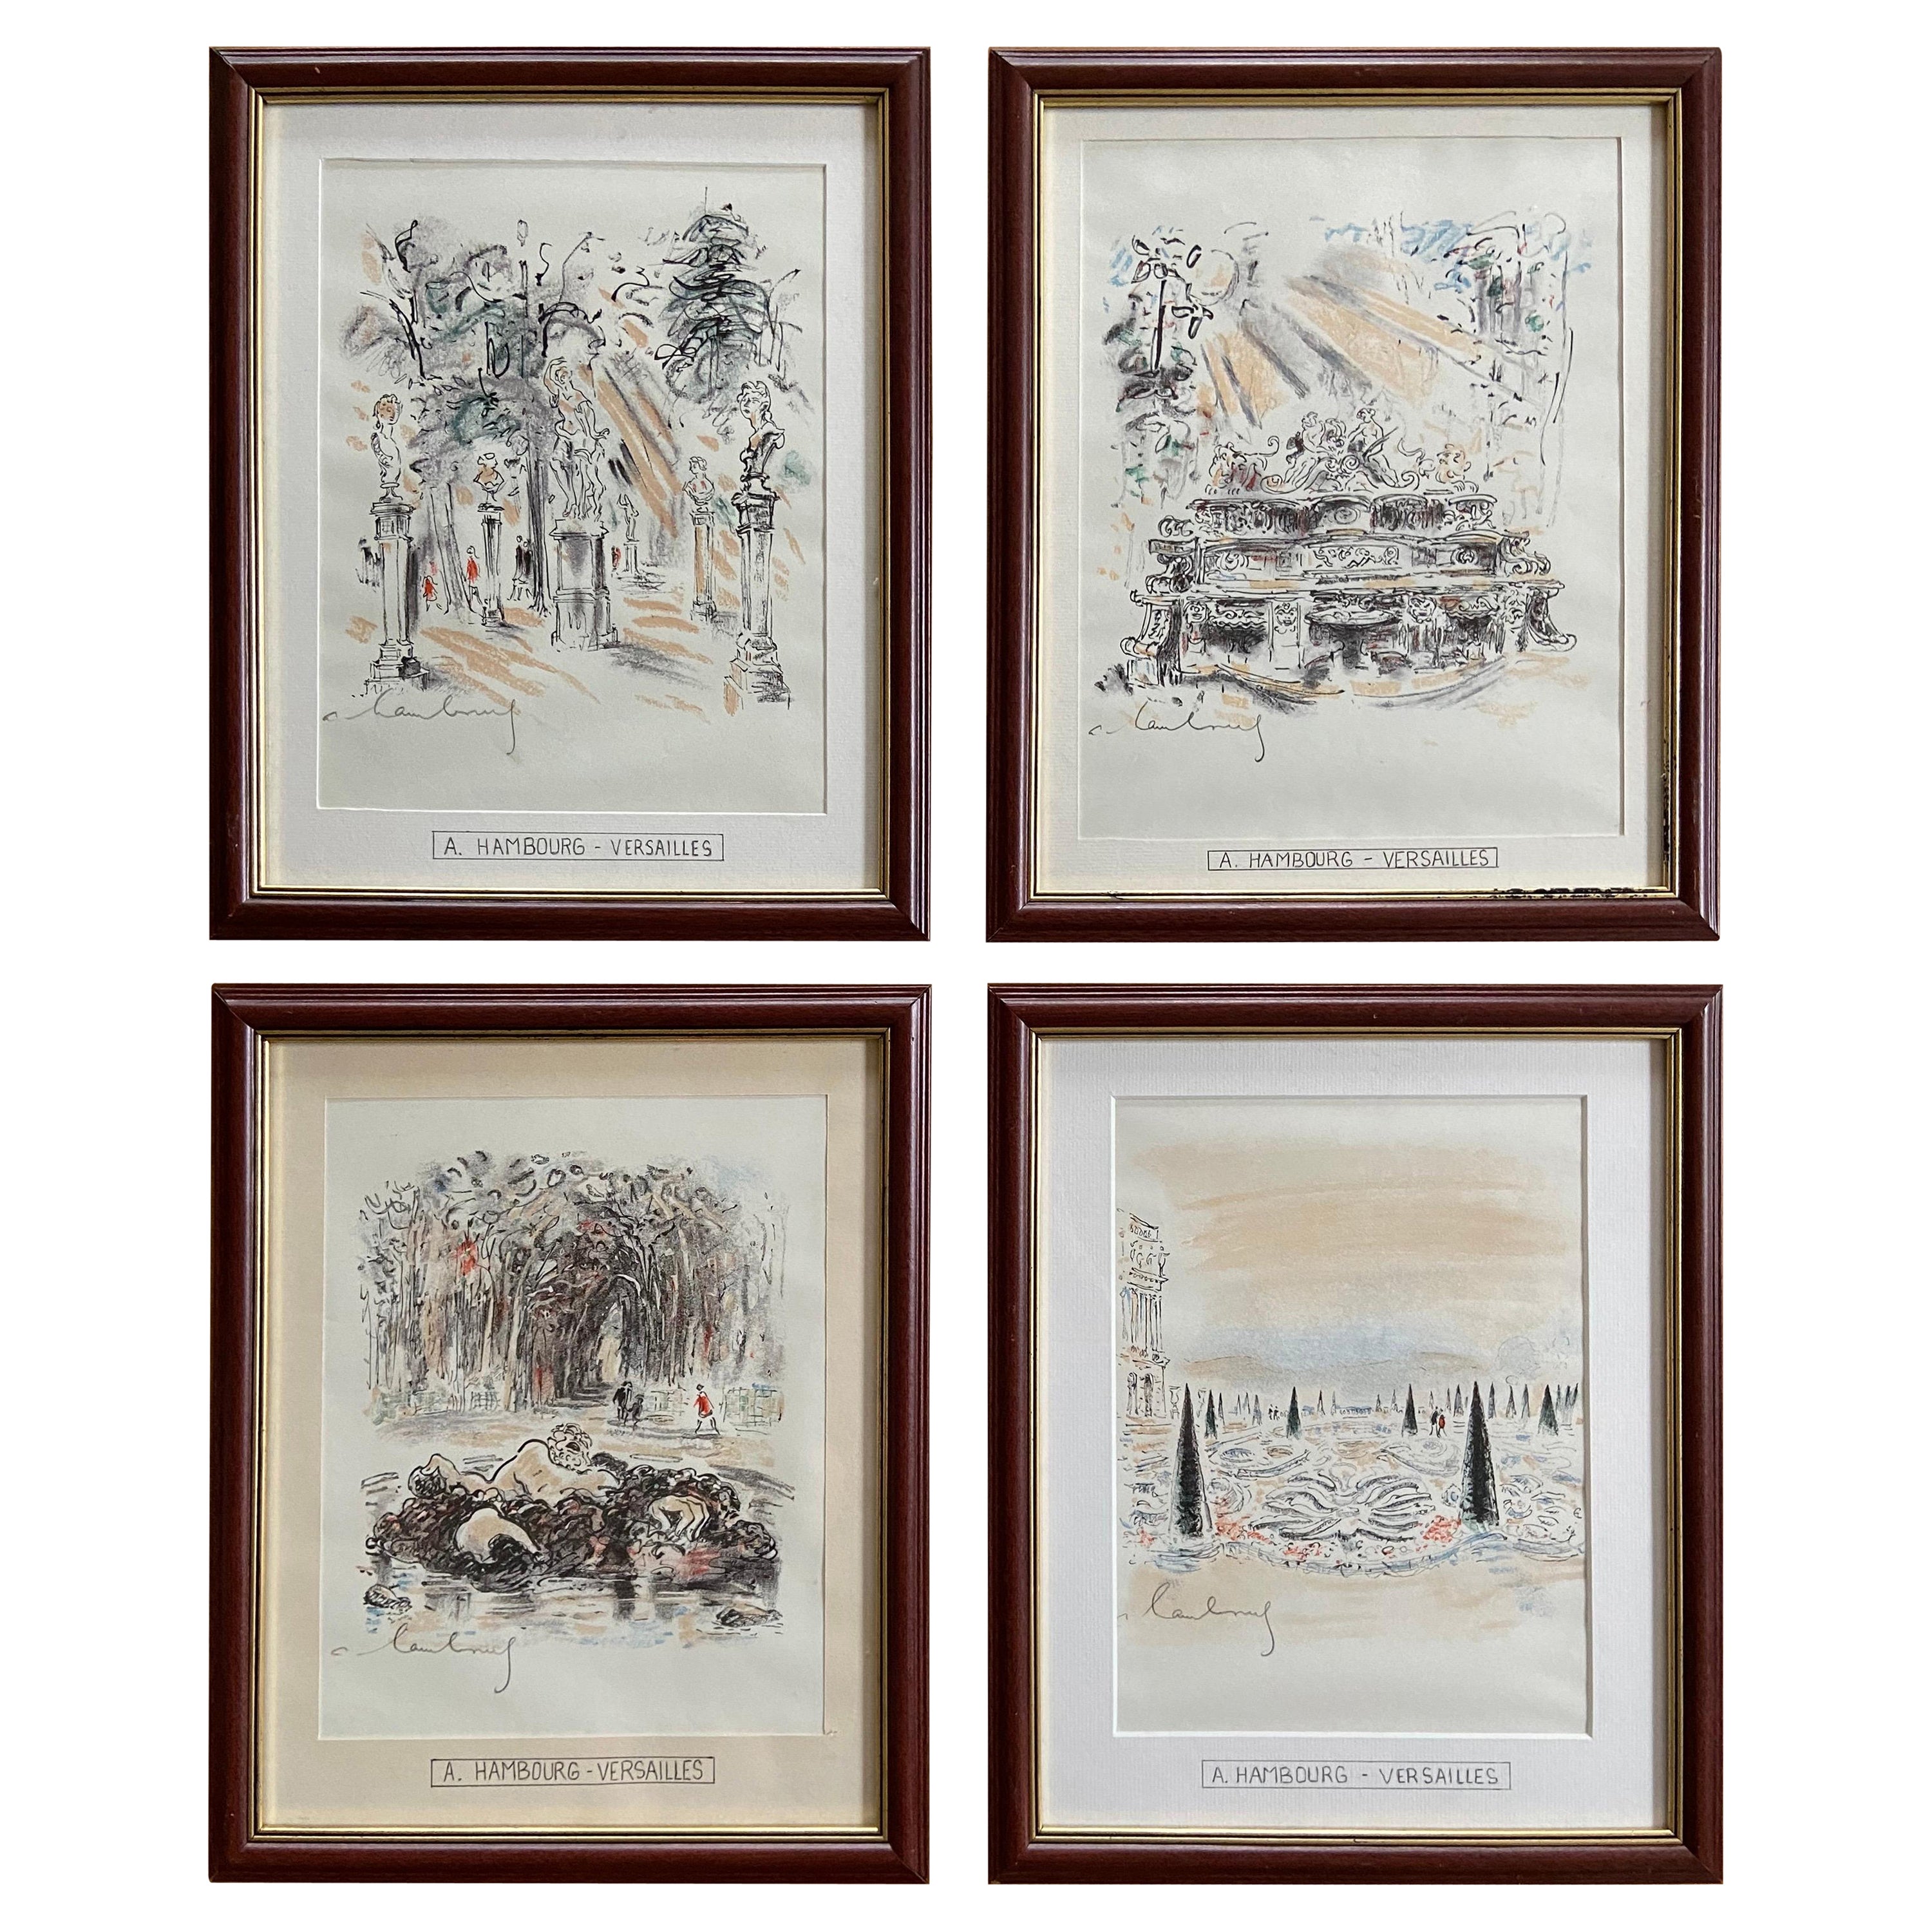 20th Century French Limited Edition Lithographs of Versailles by André Hambourg For Sale